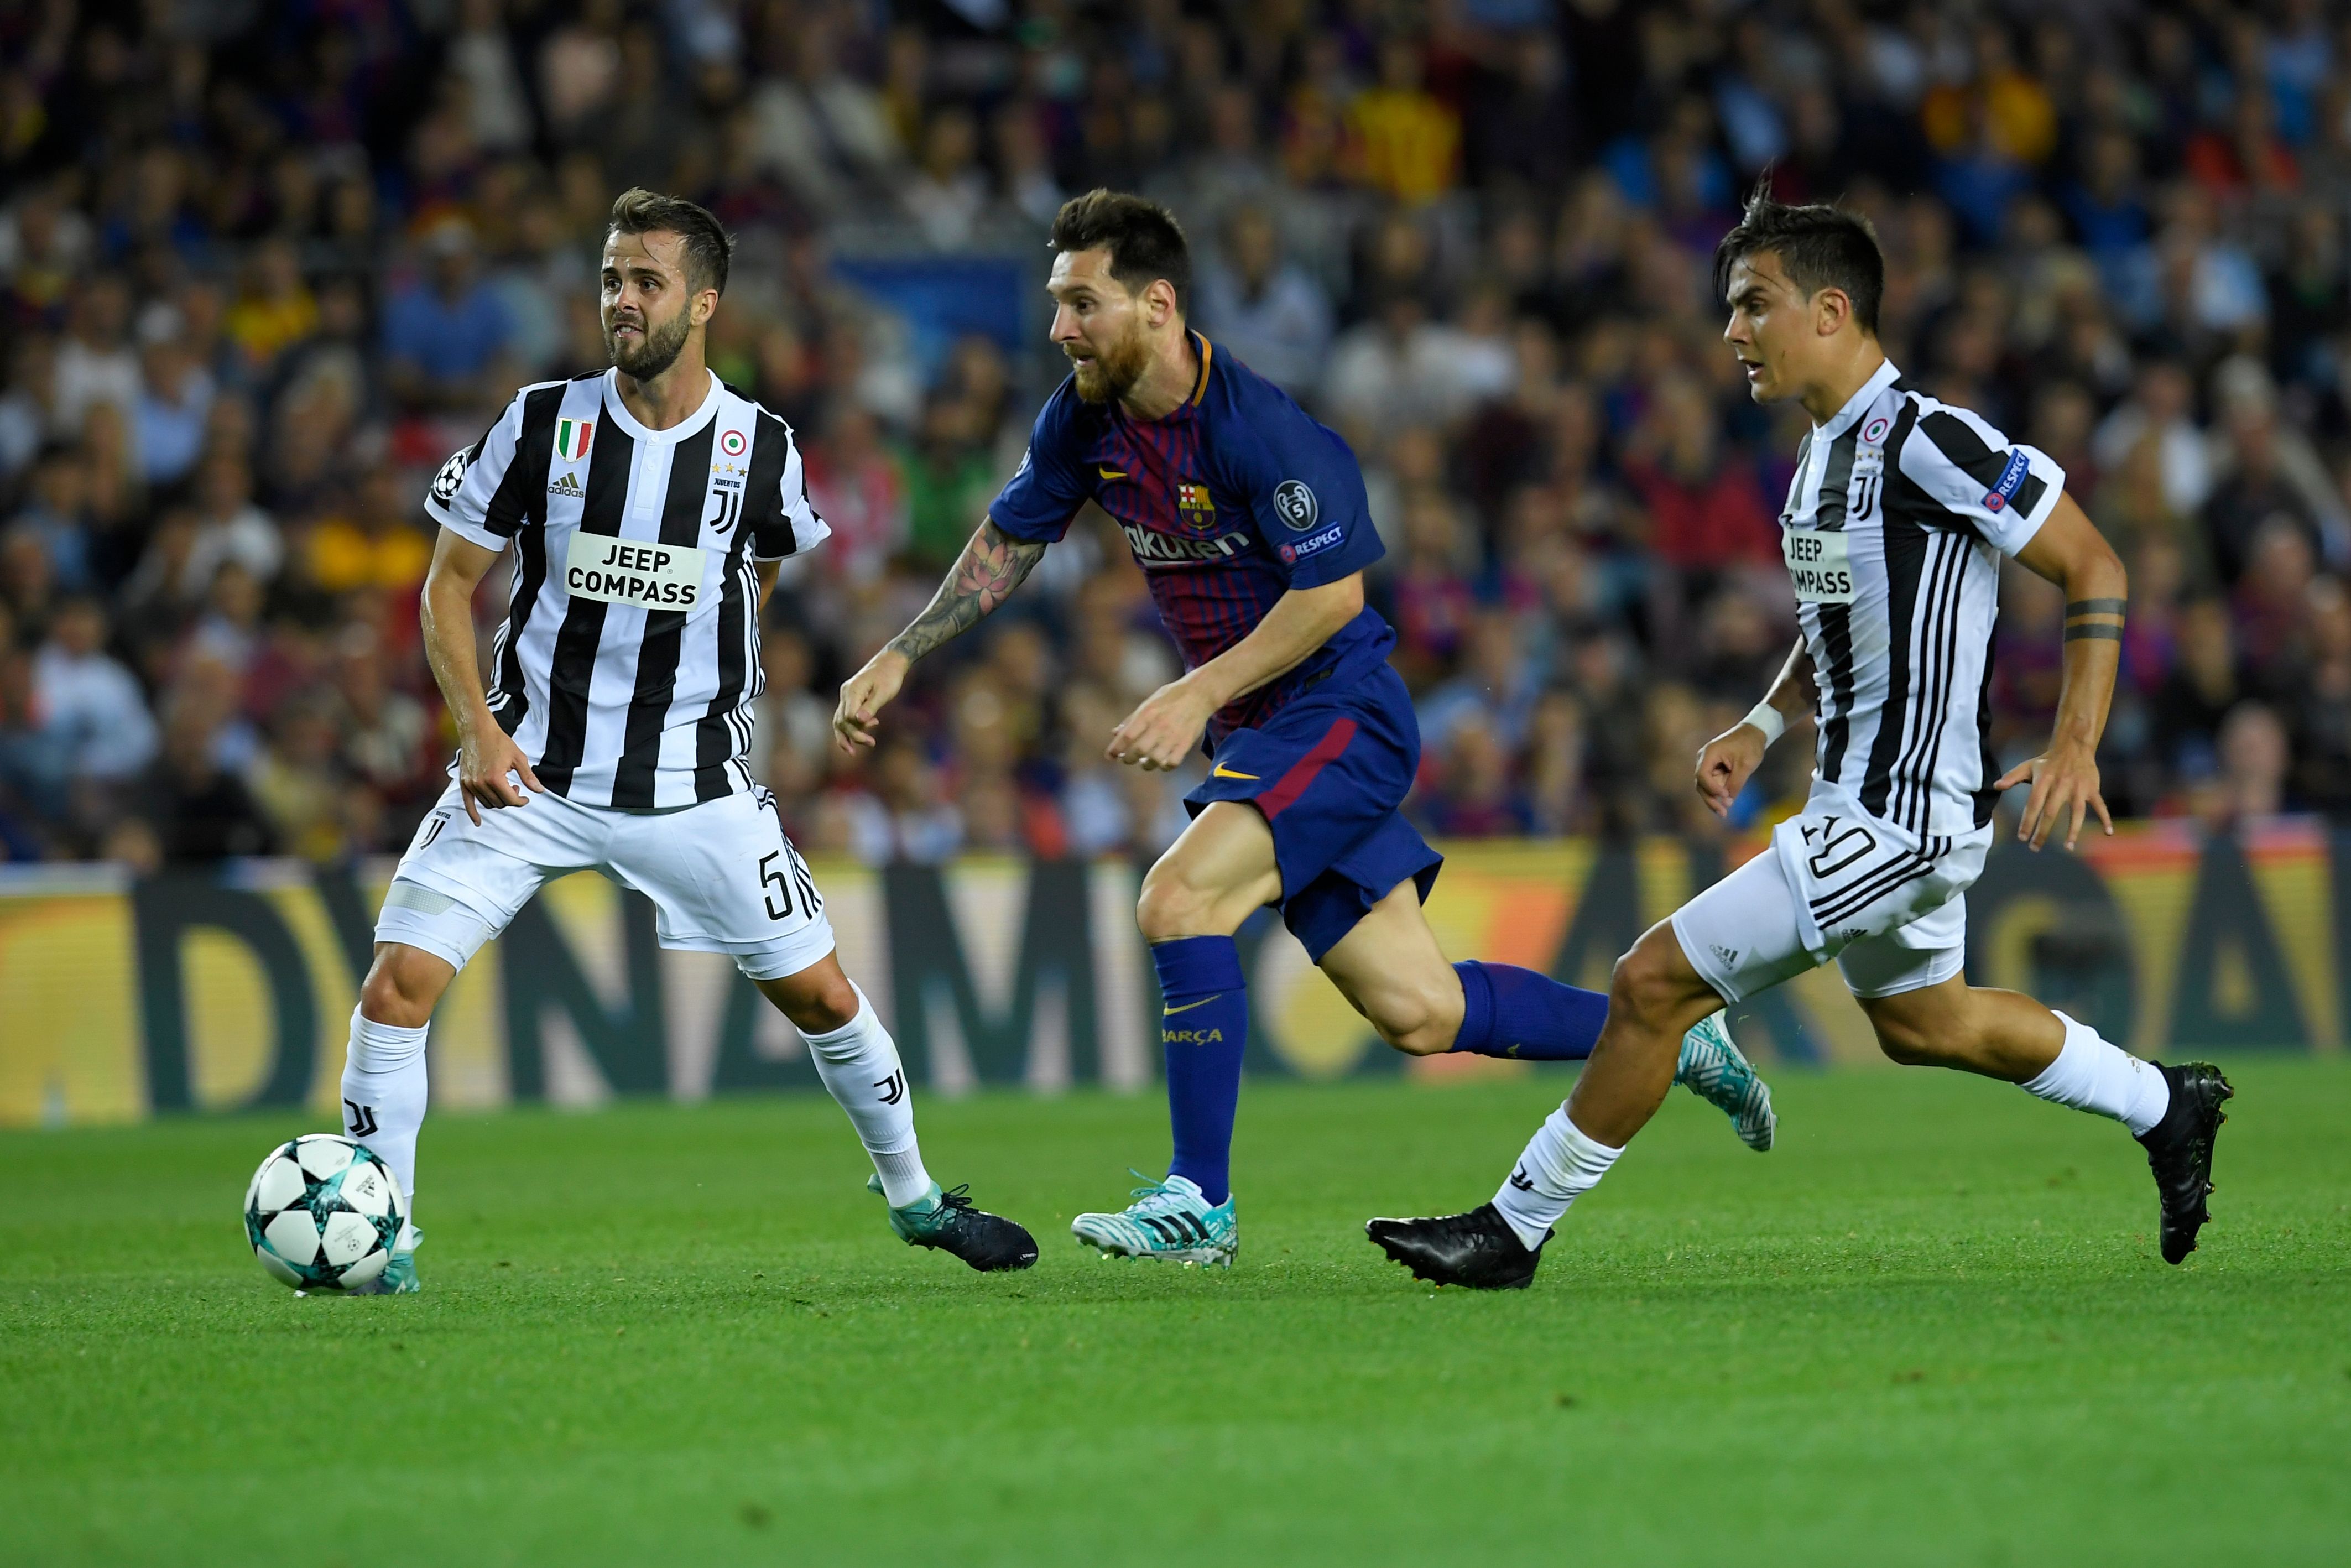 Barcelona's forward from Argentina Lionel Messi (C) vies with Juventus' midfielder from Bosnia-Herzegovina Miralem Pjanic (L) and Juventus' forward from Argentina Paulo Dybala during the UEFA Champions League Group D football match FC Barcelona vs Juventus at the Camp Nou stadium in Barcelona on September 12, 2017. / AFP PHOTO / LLUIS GENE        (Photo credit should read LLUIS GENE/AFP/Getty Images)